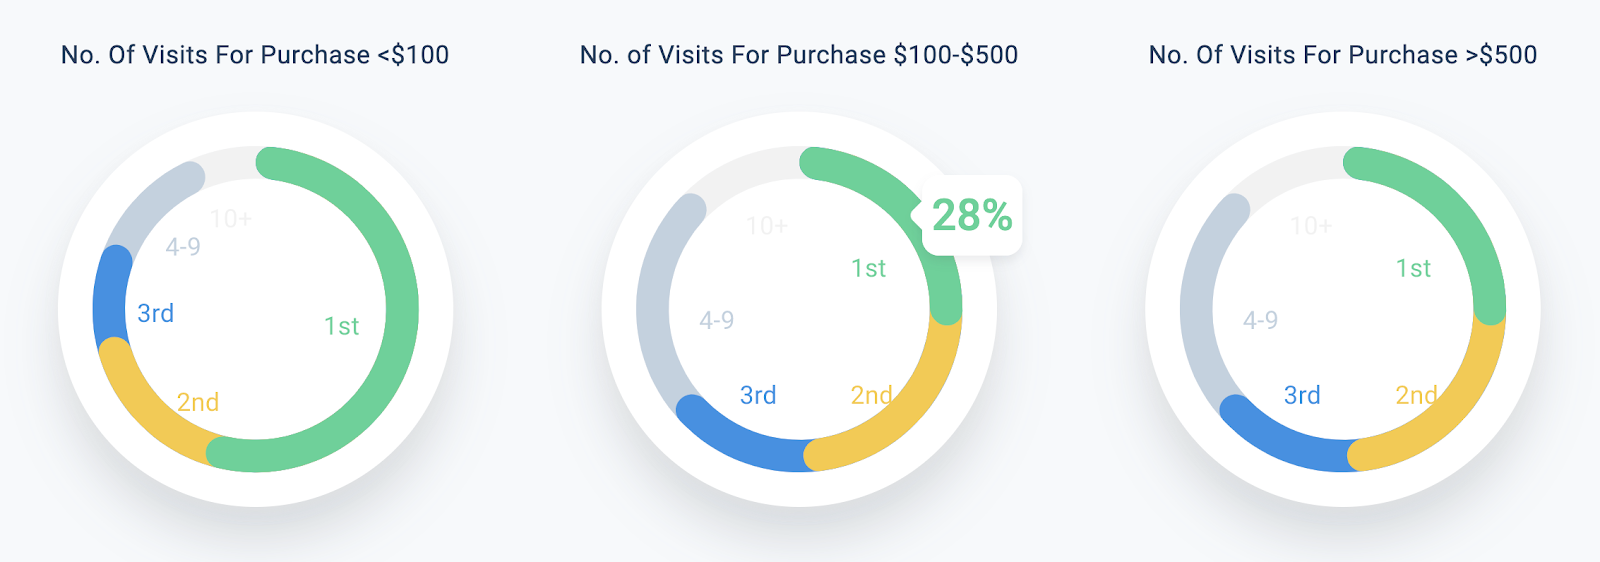 Charts showing the number of visits before purchase depending on price